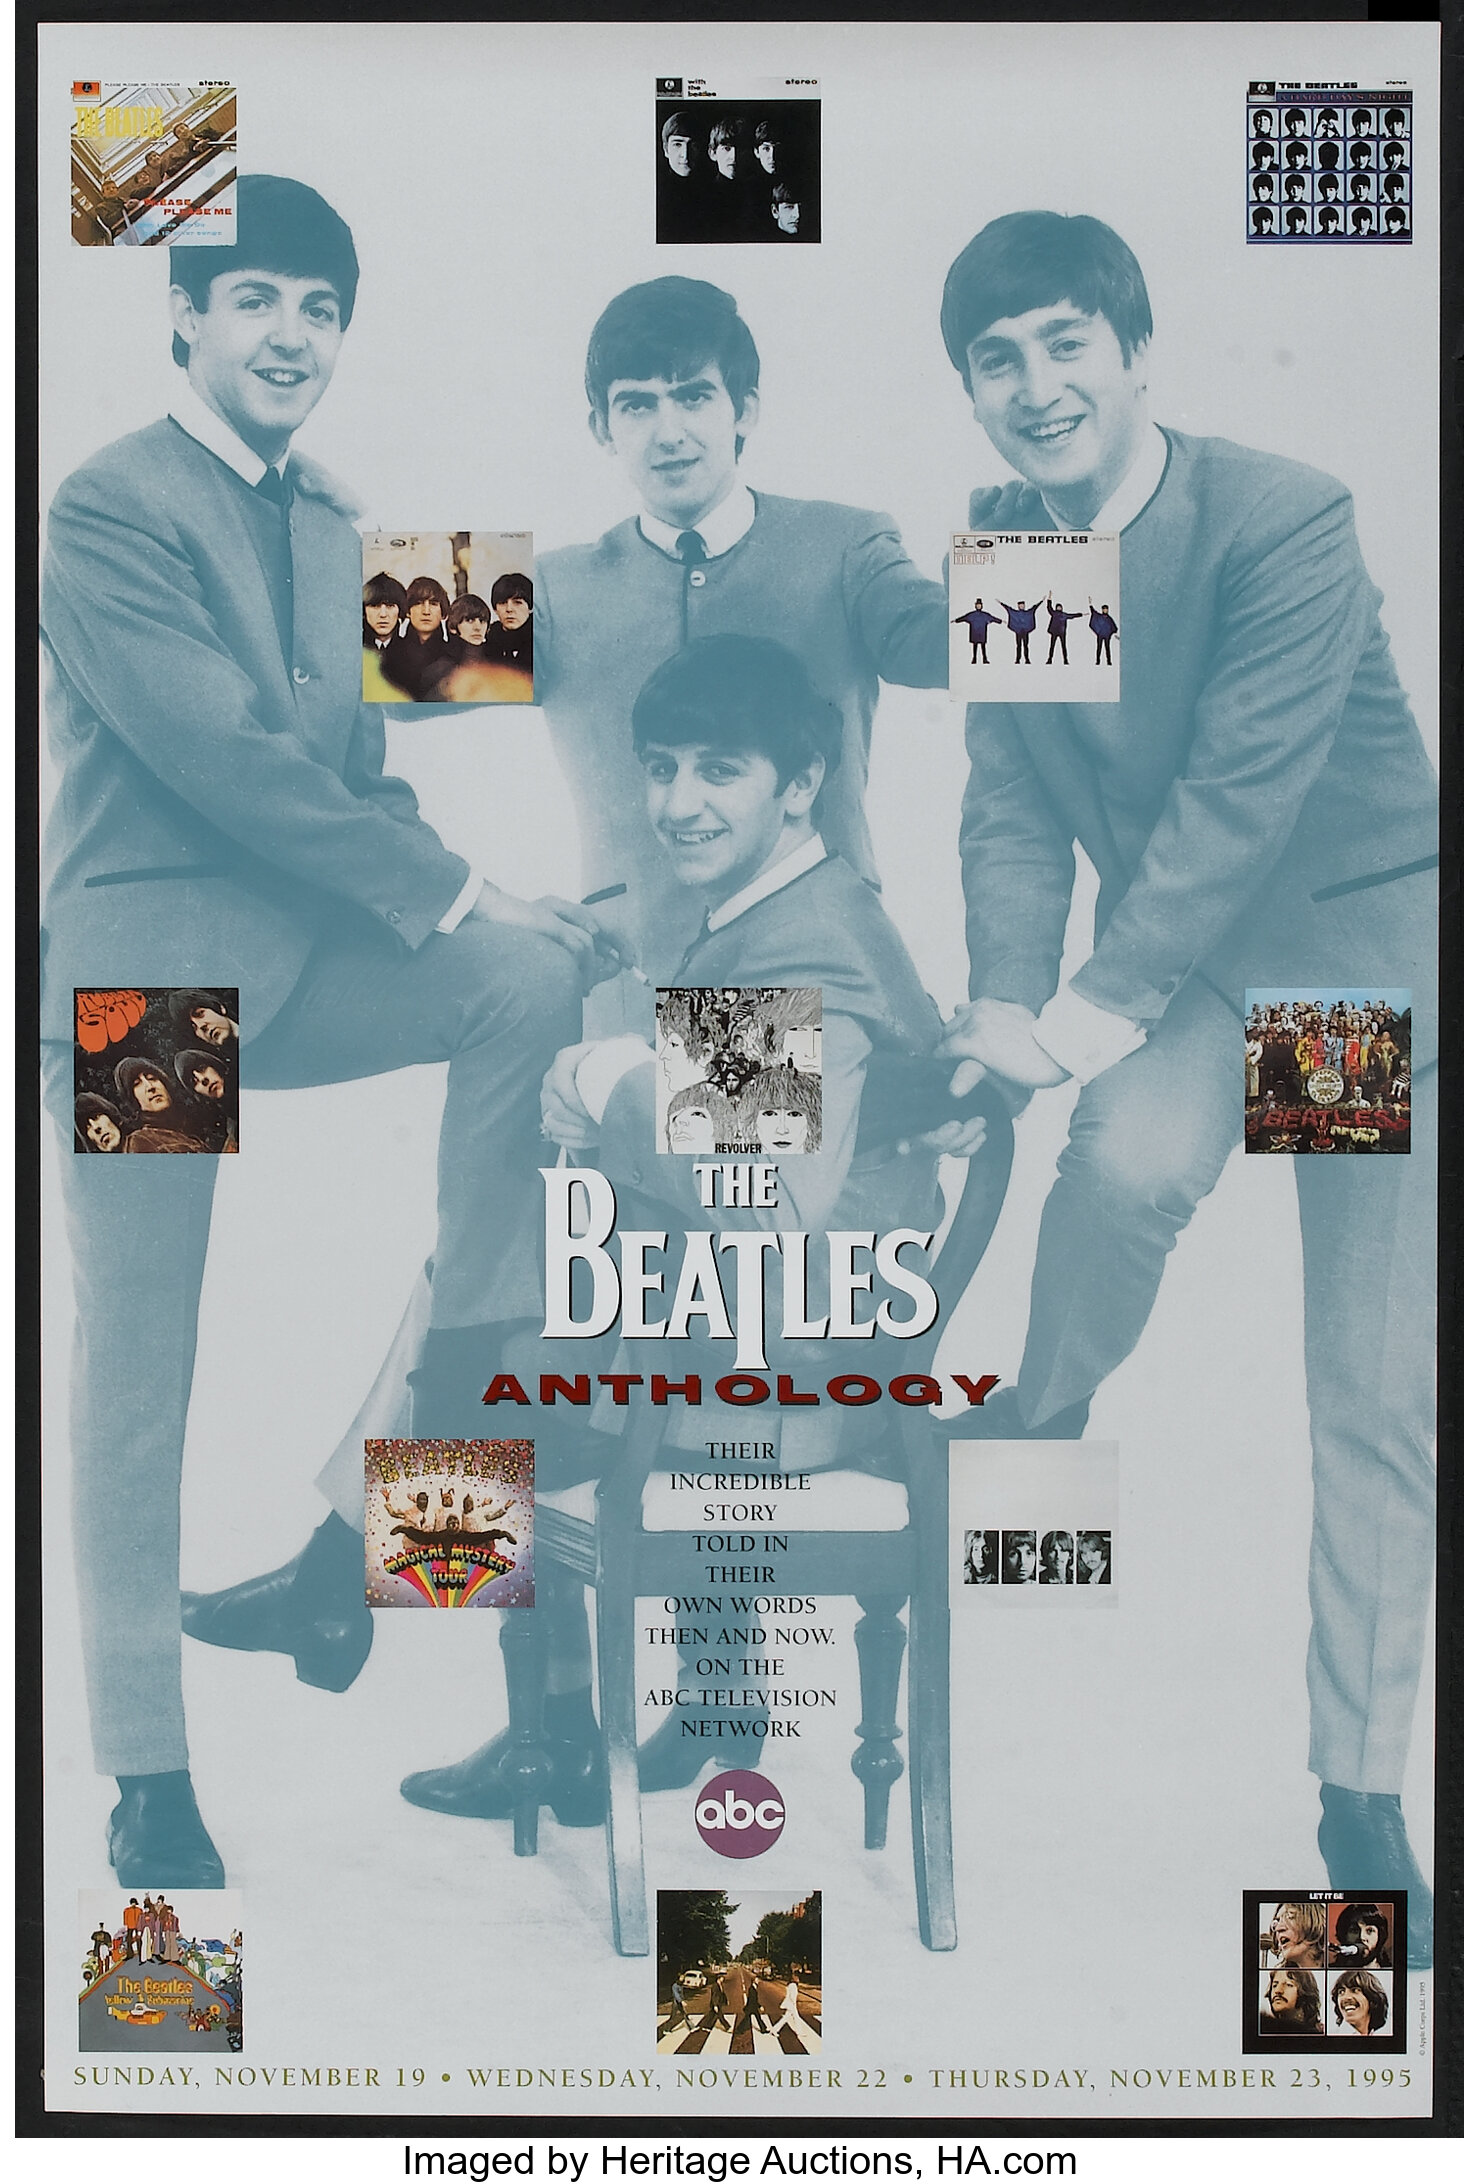 The Beatles Anthology Abc 1995 Television Poster 27 X 41 Lot Heritage Auctions